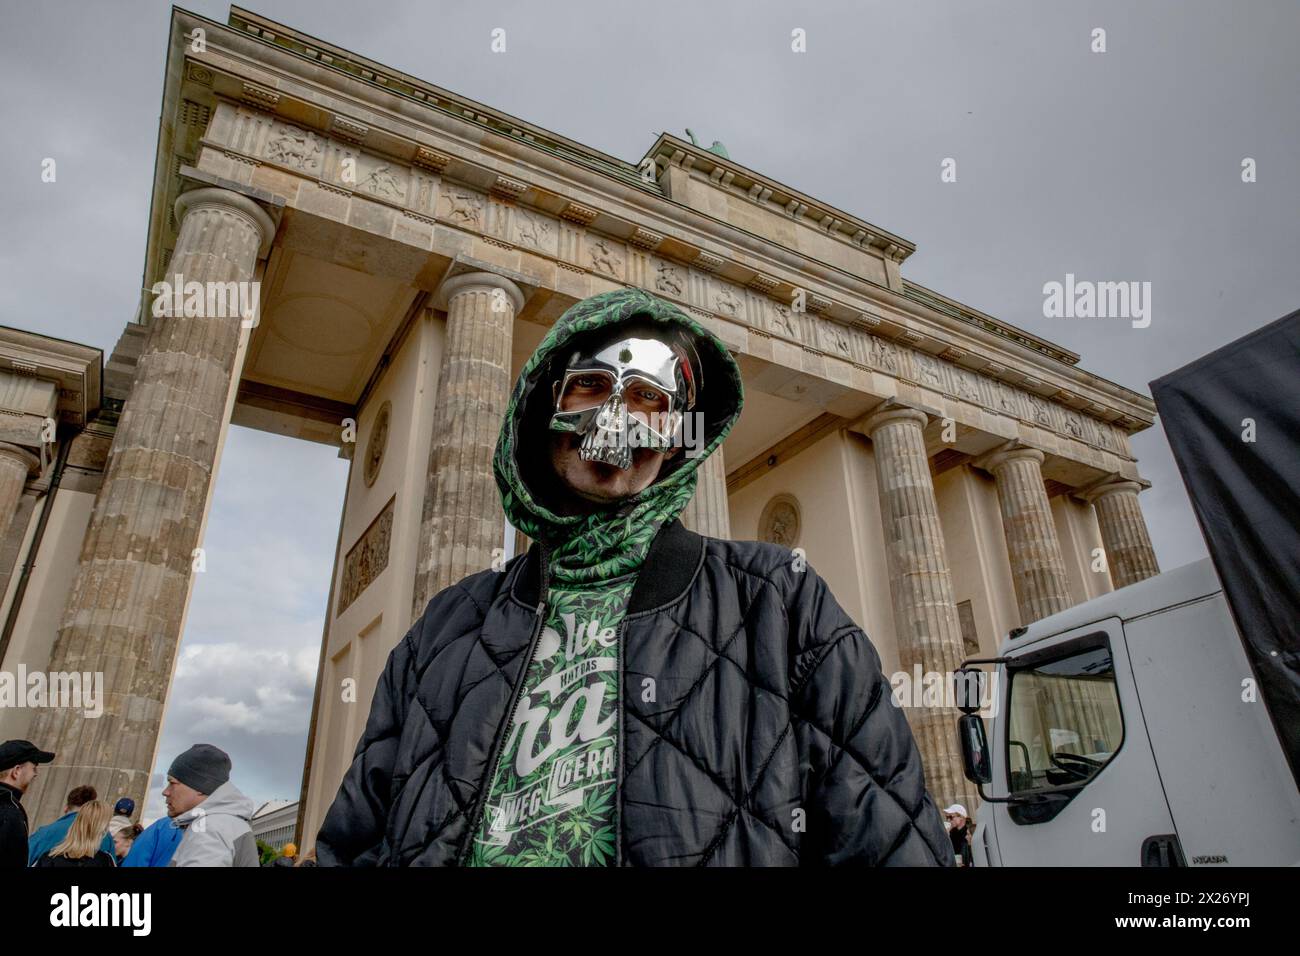 April 20, 2024, Berlin, Germany: People gathered at the Brandenburg Gate in Berlin on Saturday, April 20, 2024, to celebrate the first legal ''Smoke-In'' event, marking 420 Day, a date internationally recognized as a celebration of cannabis culture. Performances by notable acts such as Marsimoto, Green, Marvin Game, Ganjaman, and parts of Culcha Candela entertained the crowd, including prominent figures like Judge Andreas MÃ¼ller of Bernau District Court. MÃ¼ller, a well-known advocate for cannabis legalization, has been a visible proponent in the push for reform. Event organizers emphasized i Stock Photo